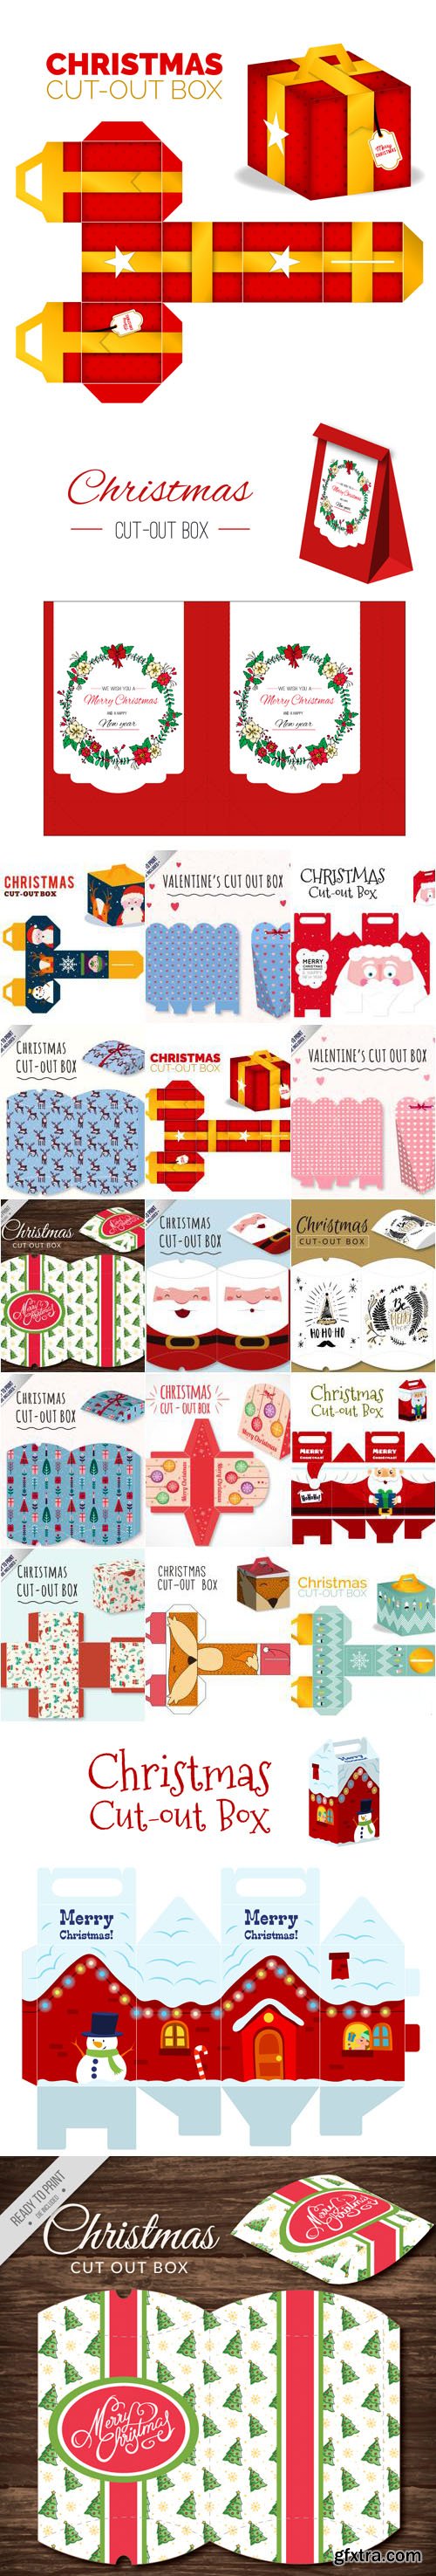 32 Christmas Cut-Out Box Vector Templates